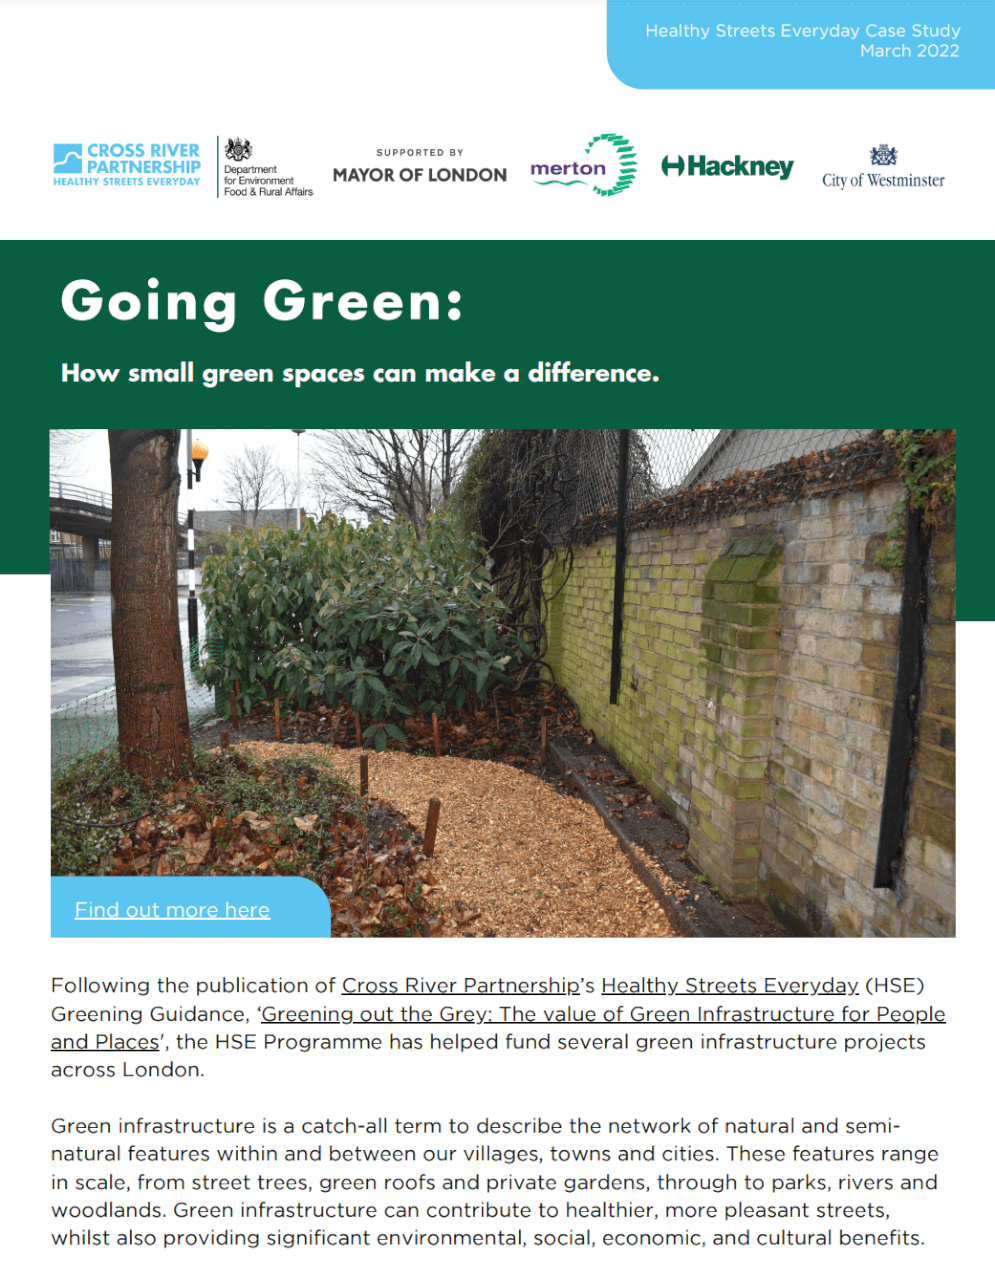 Going Green: How small green spaces can make a difference – Healthy Streets Everyday Case Study 2022